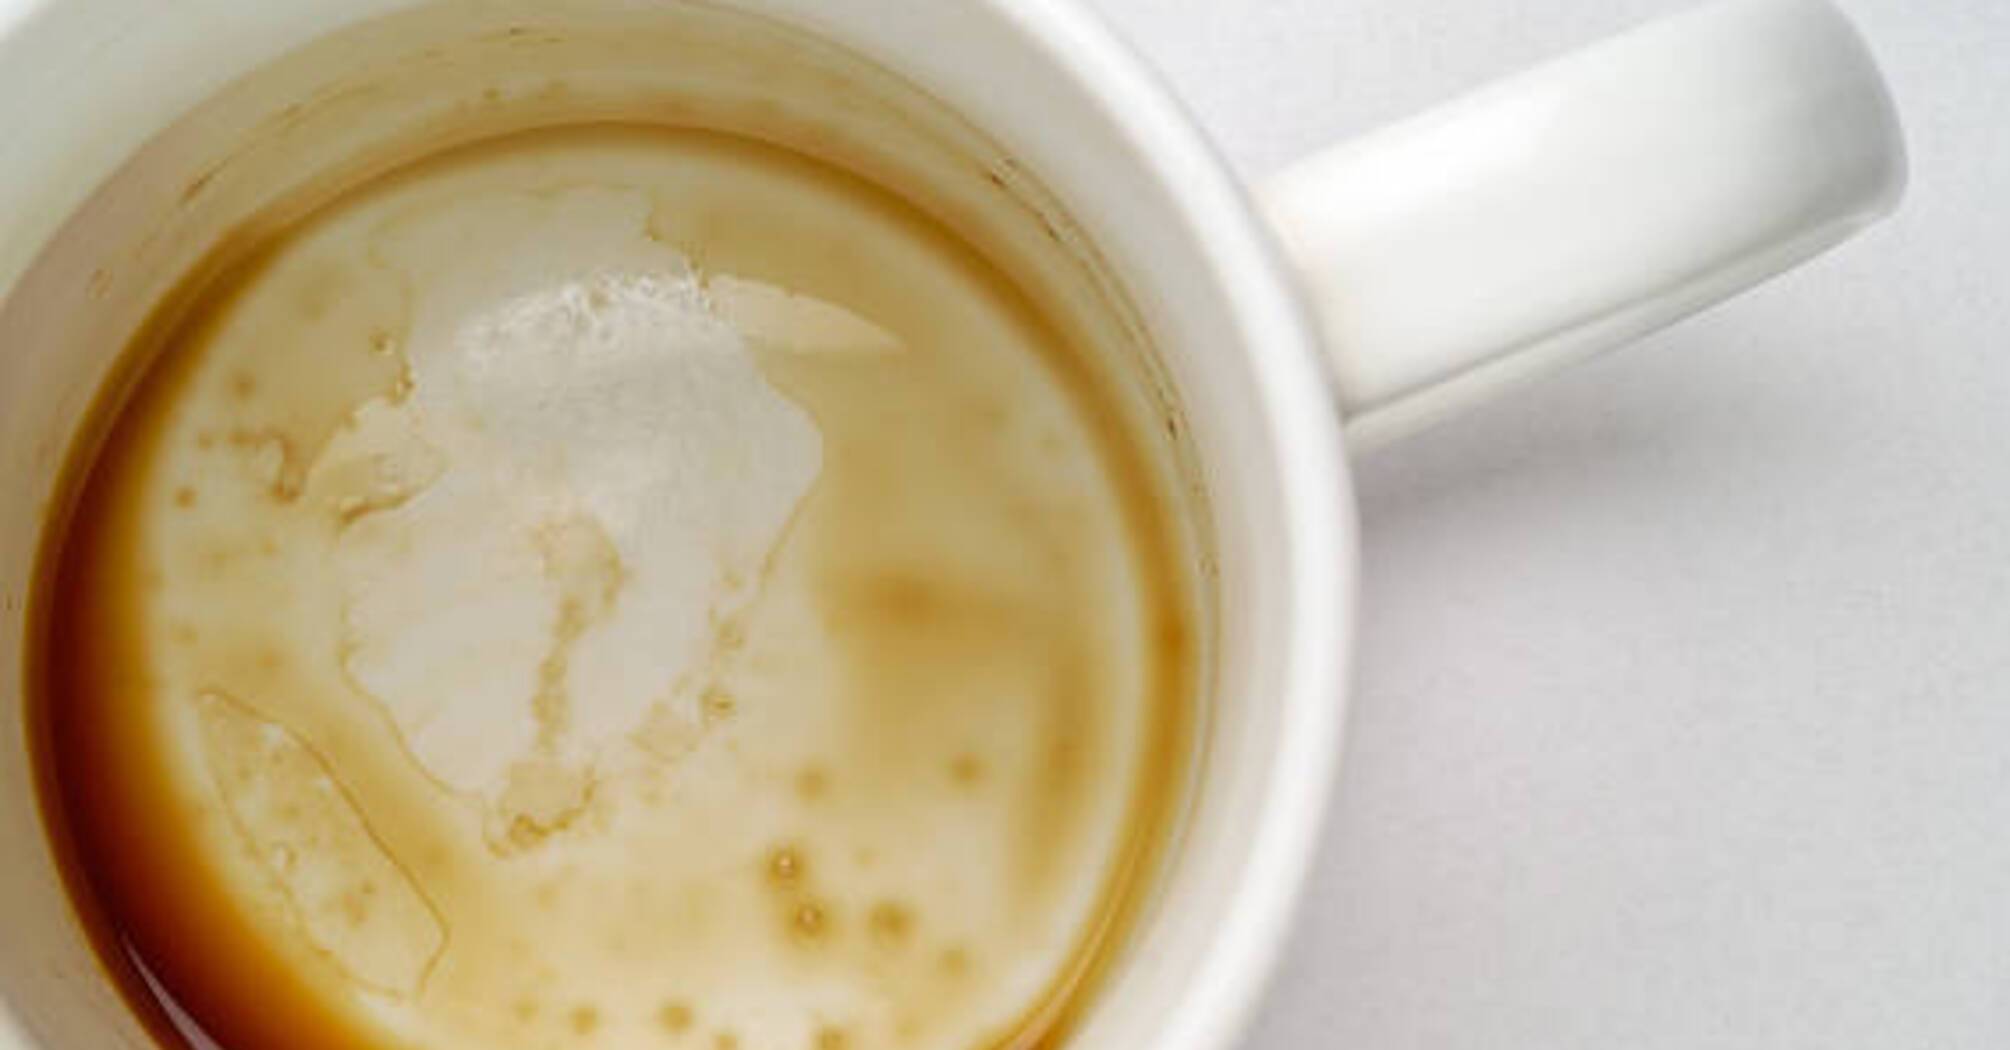 How to remove stubborn tea and coffee deposits on a cup: 3 interesting life hacks